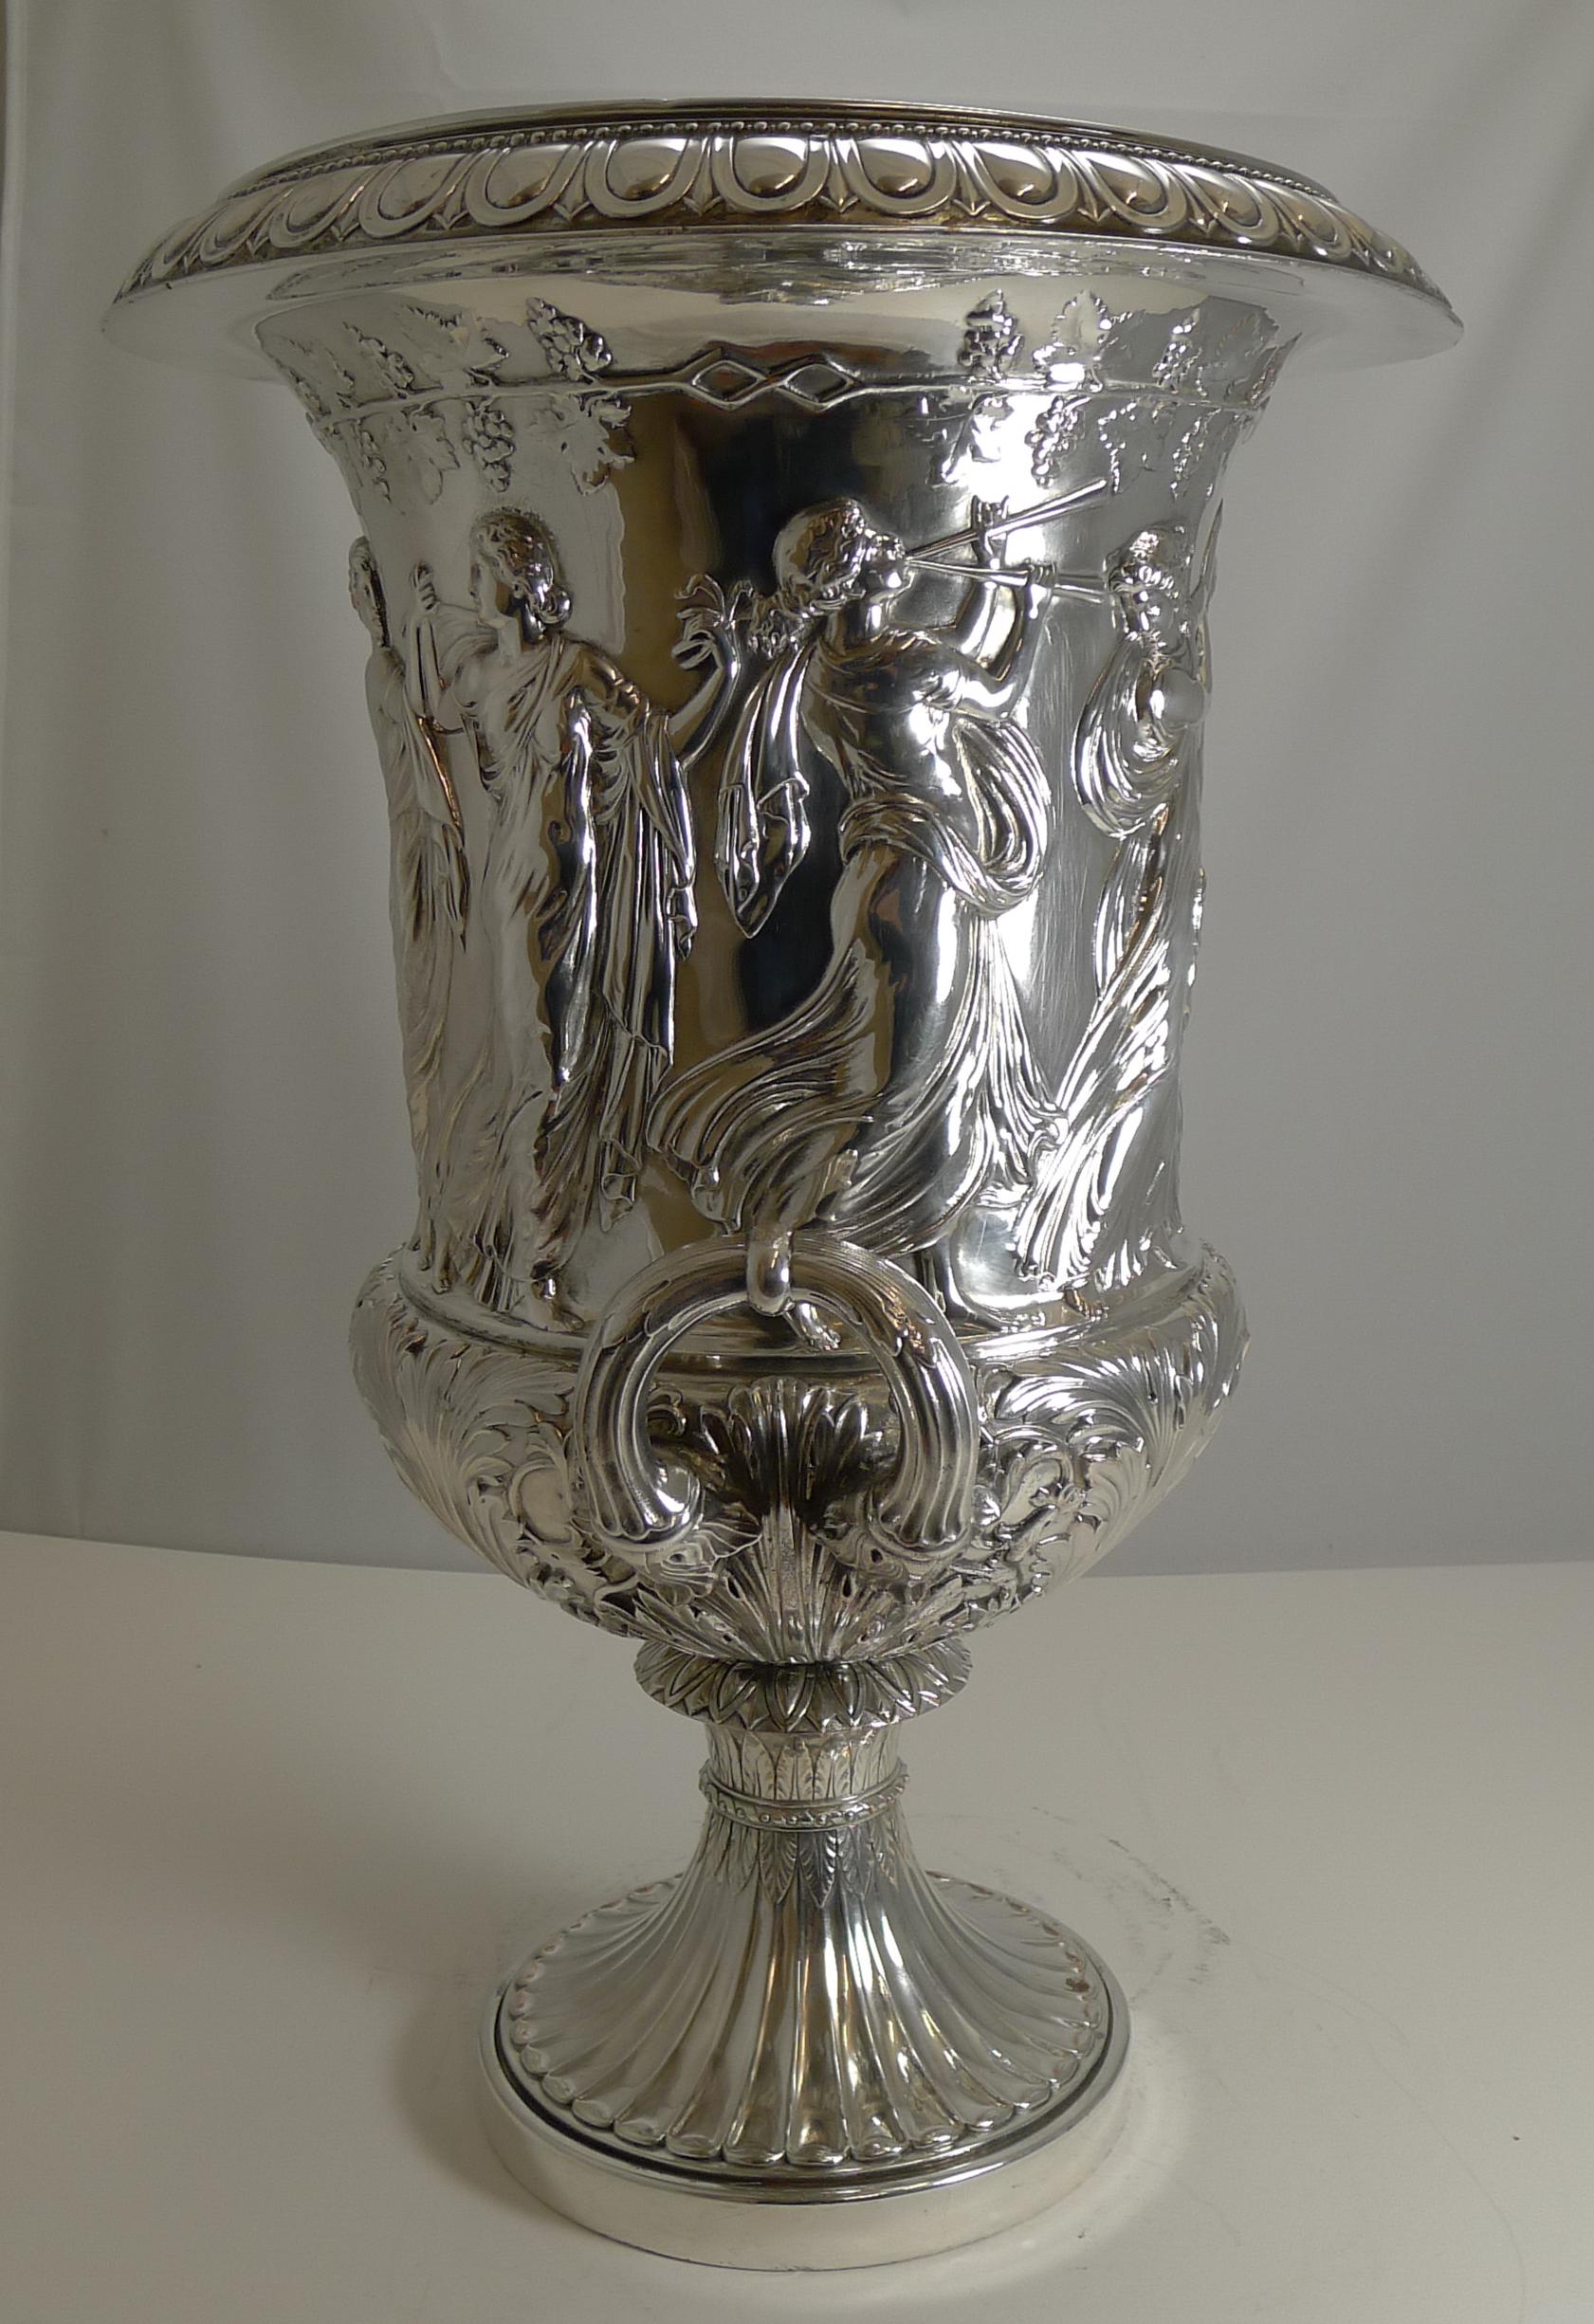 Silver Plate Antique English Oversized Wine / Champagne Cooler or Bucket